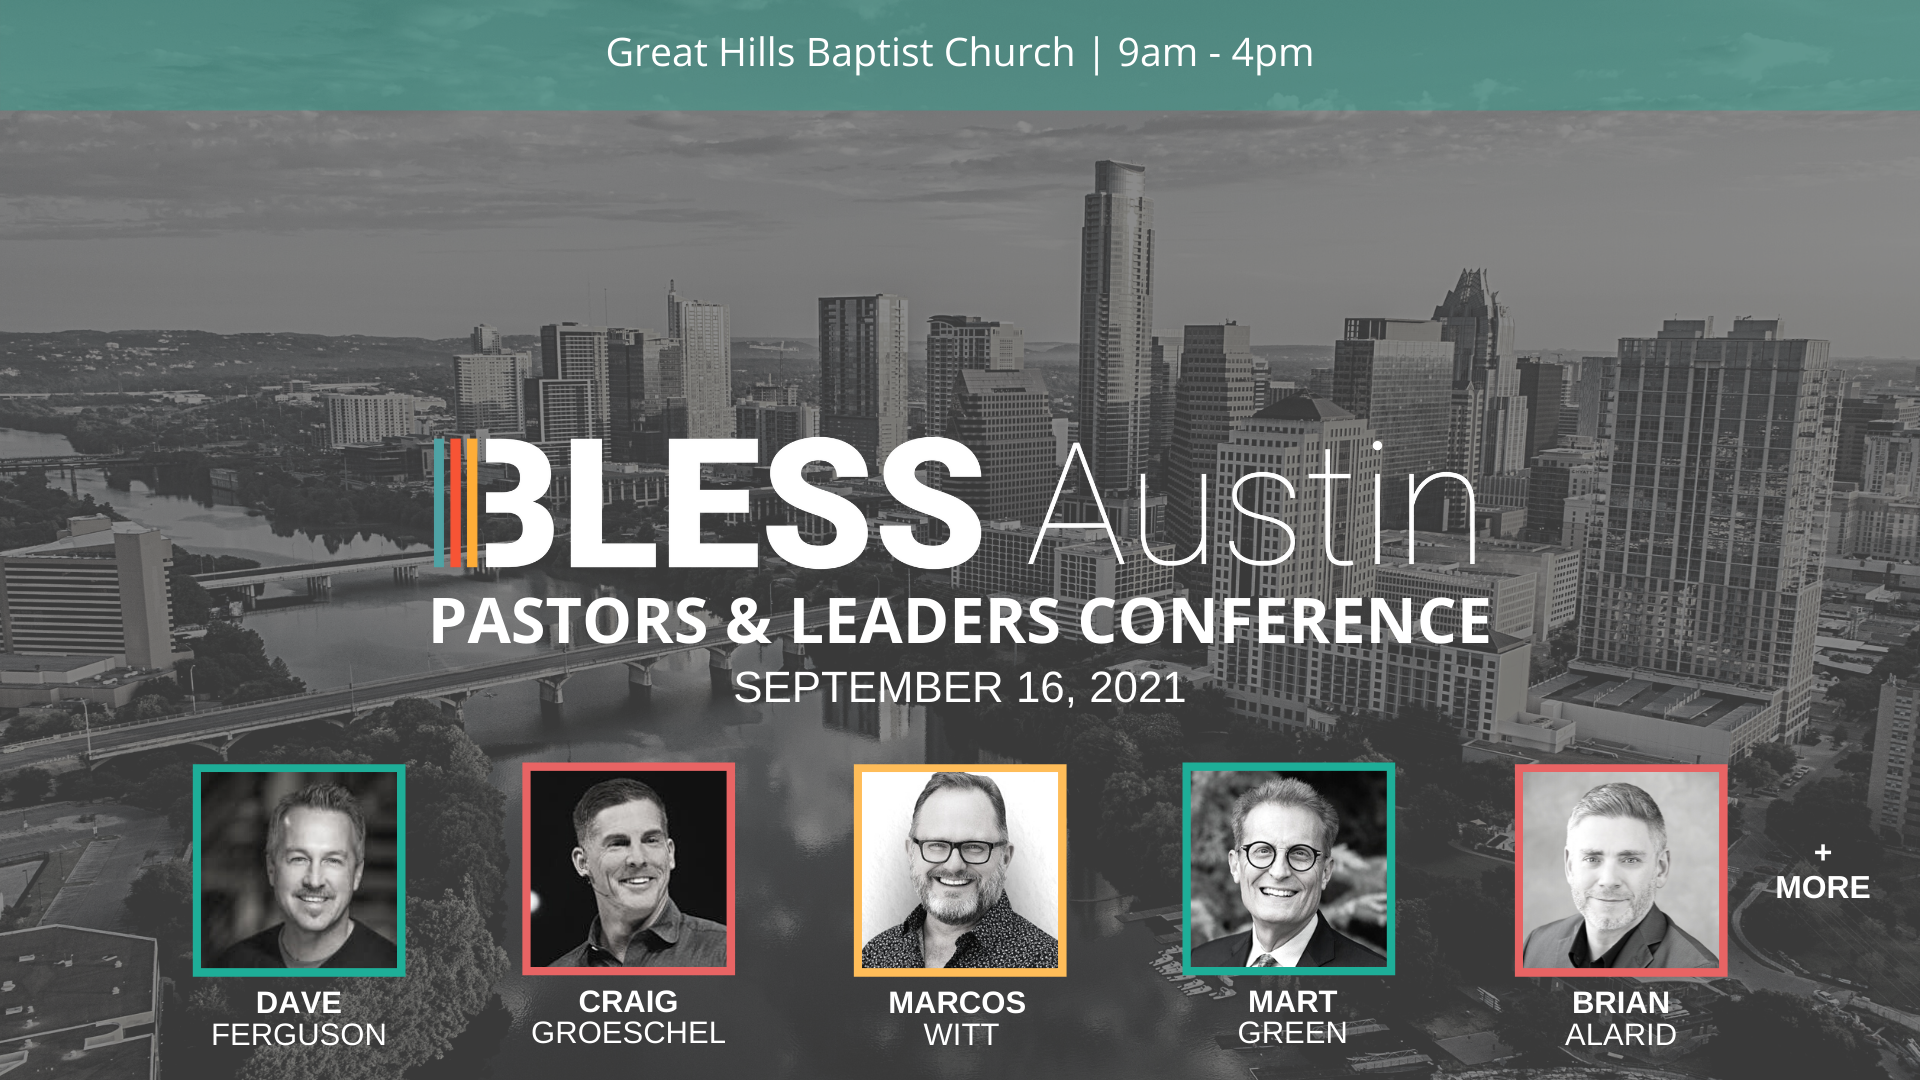 BLESS Austin Conference PPT with Speakers